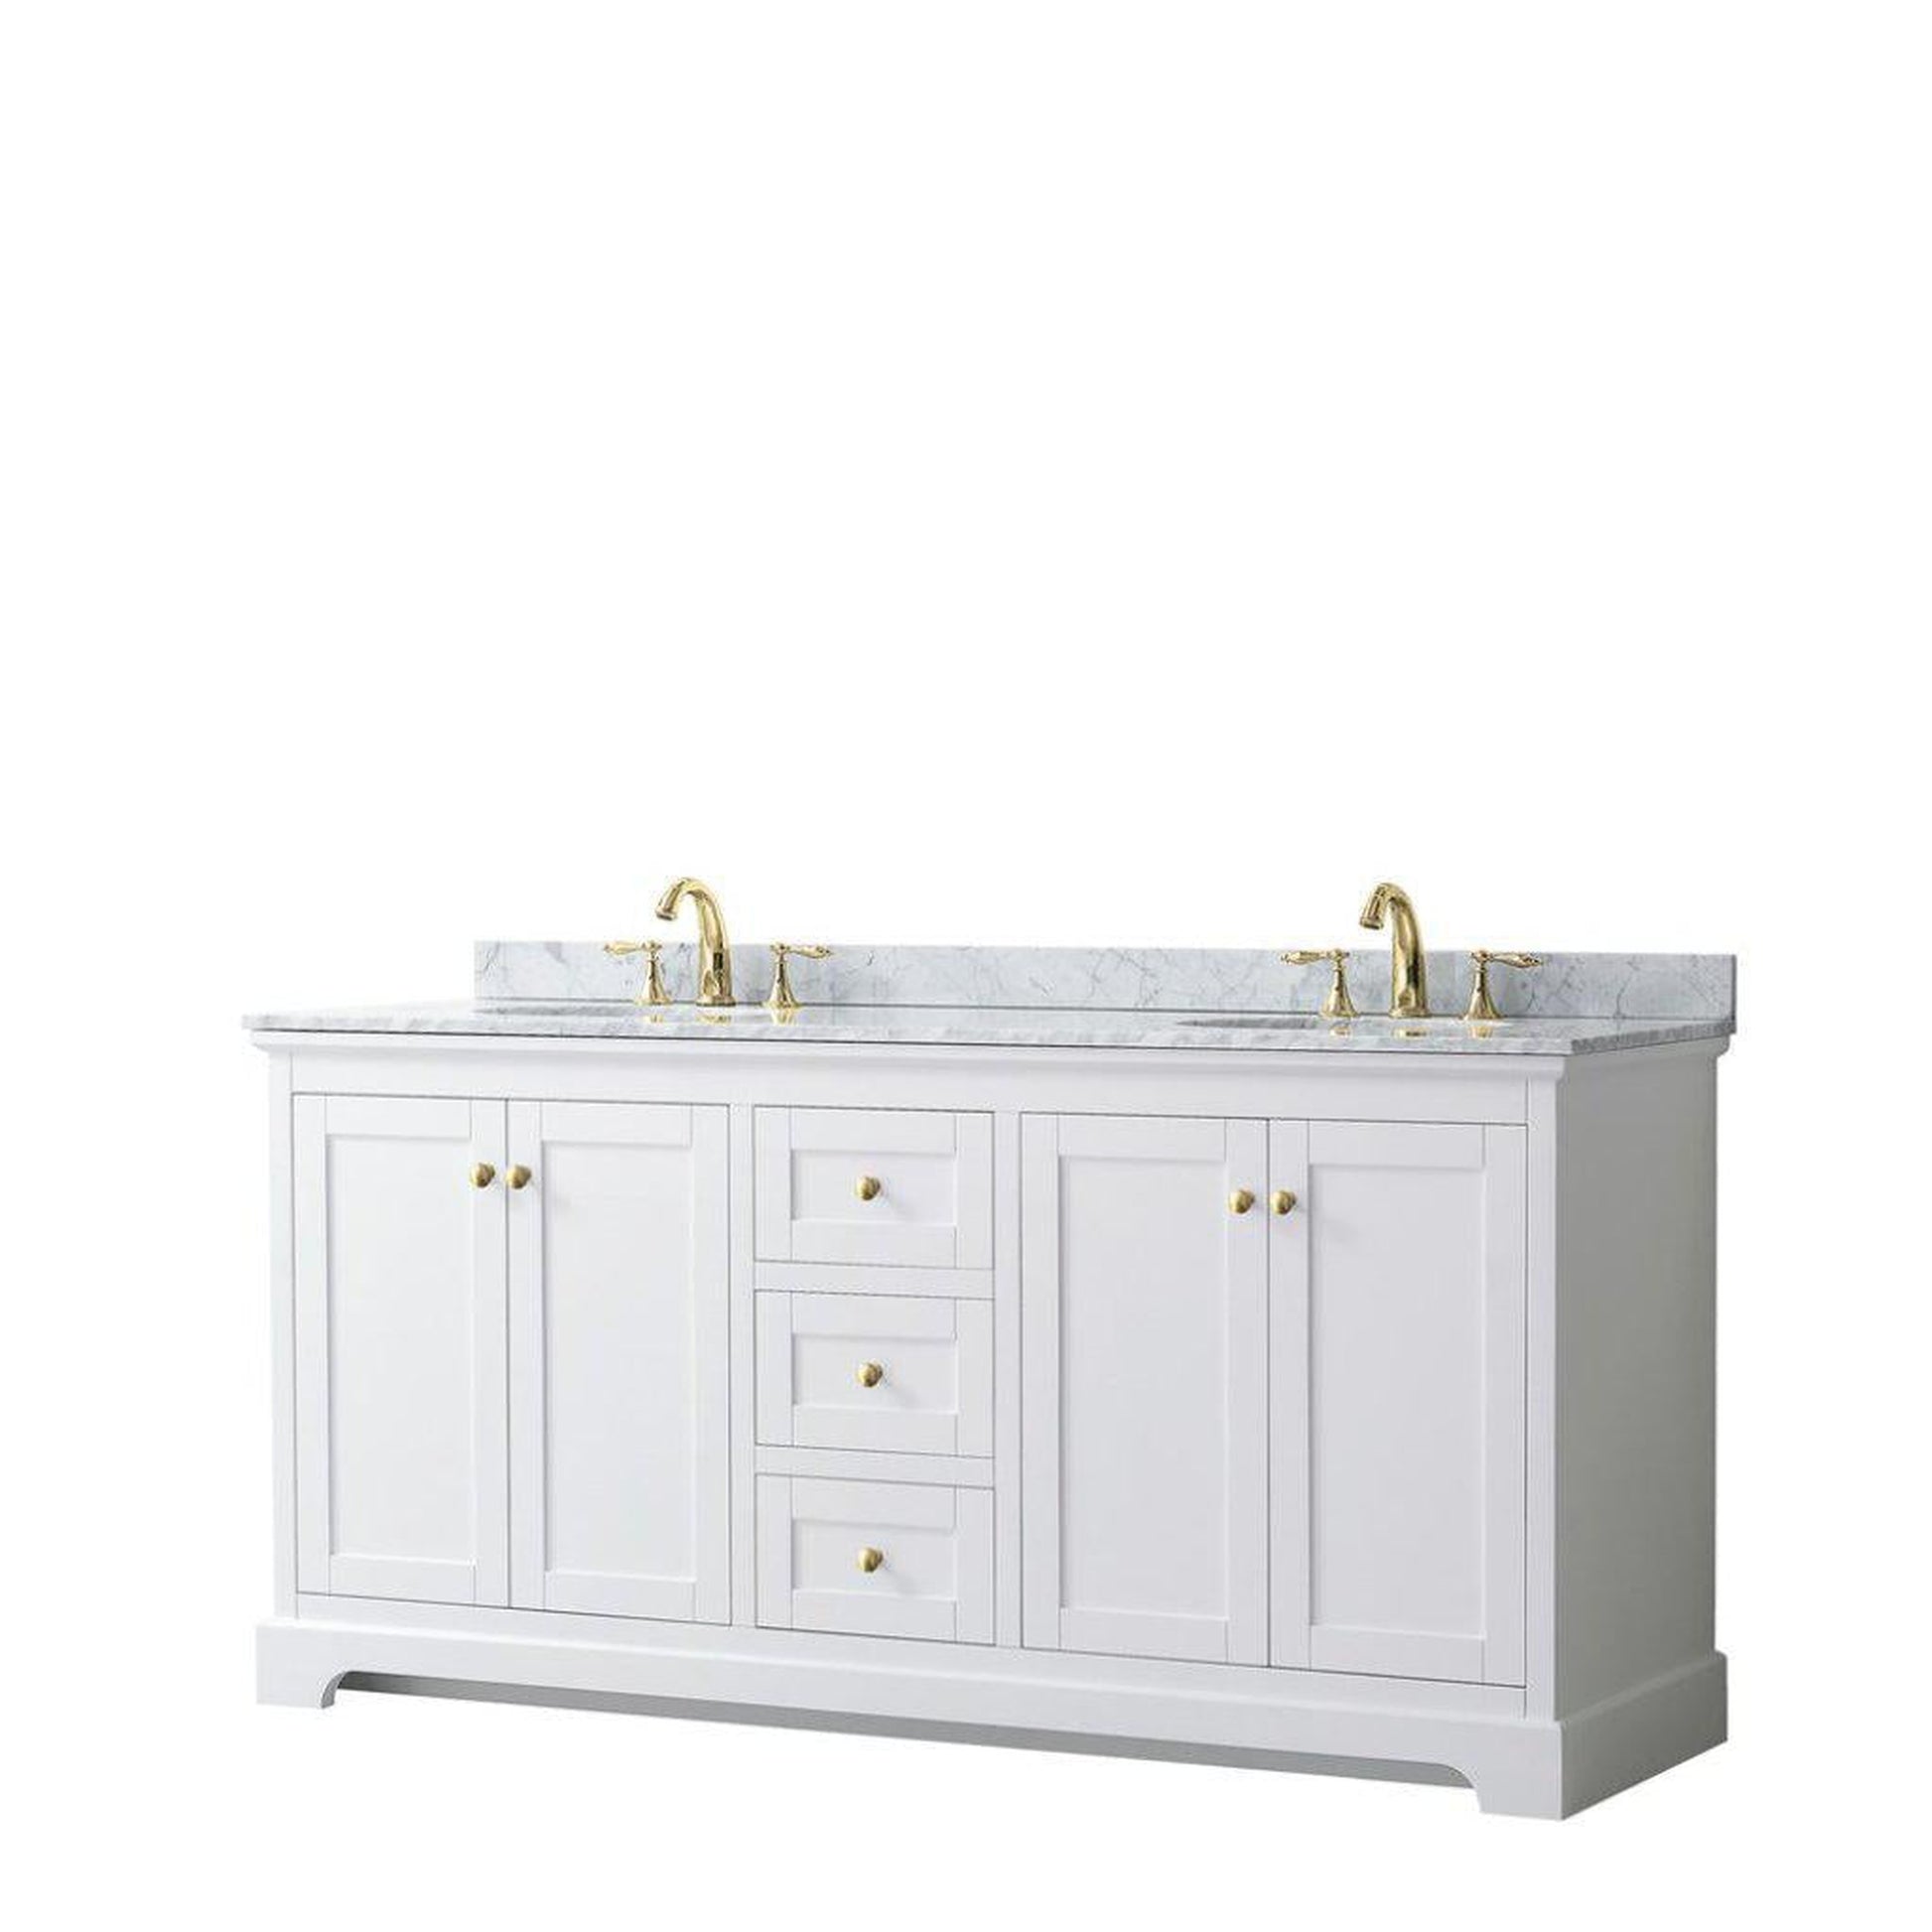 Wyndham Collection Avery 72" White Double Bathroom Vanity, White Carrara Marble Countertop With 3-Hole Faucet, 8" Oval Sink, Gold Trims